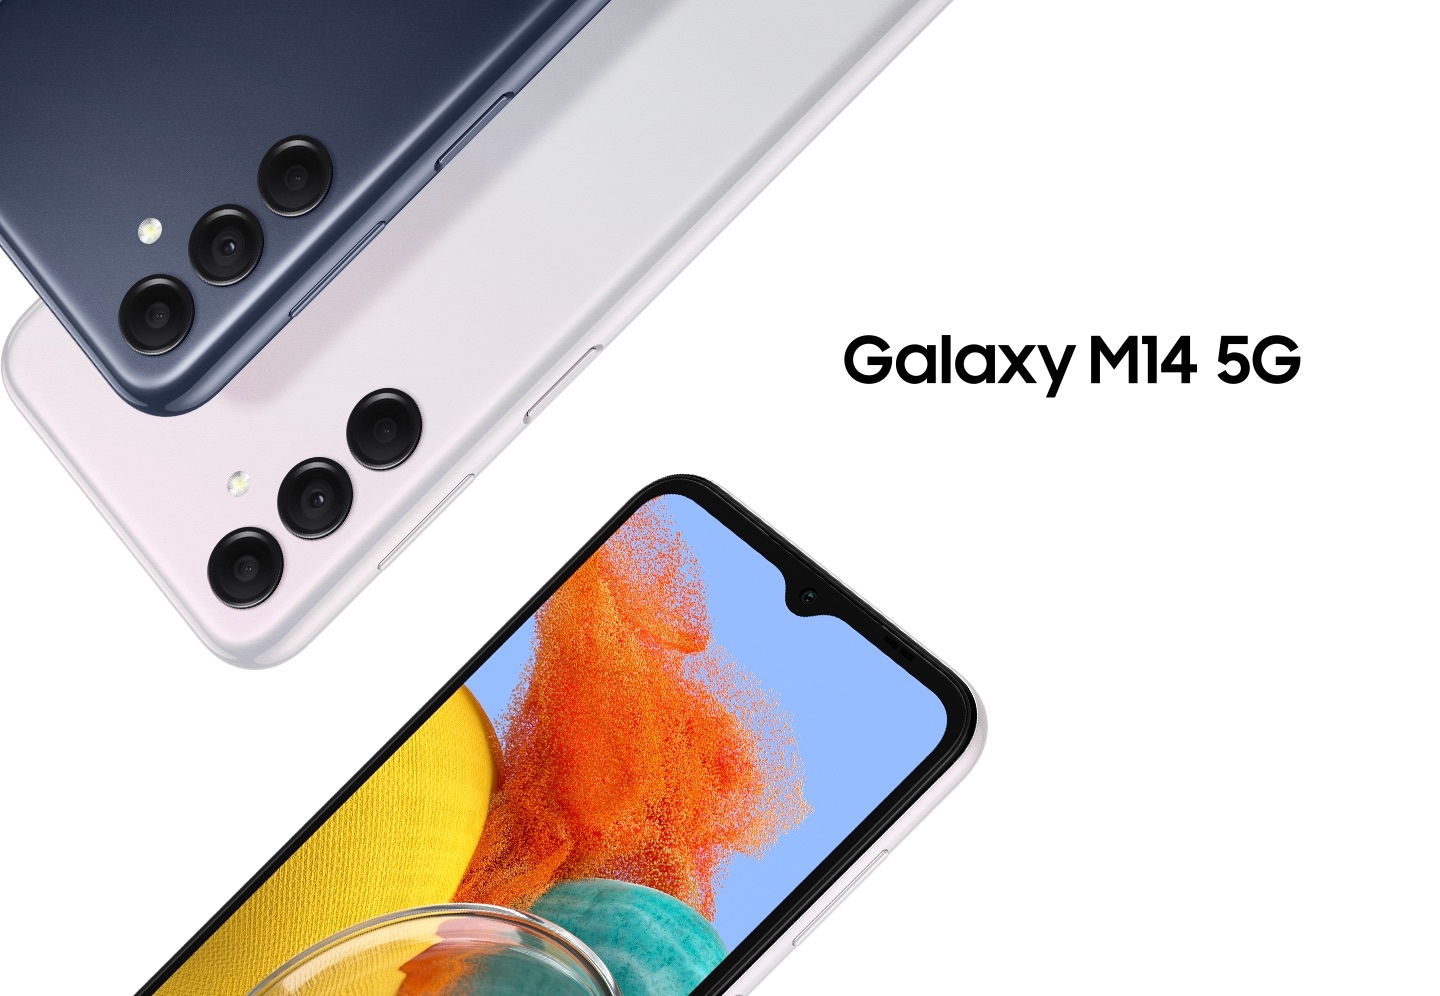 Three Galaxy M14 5G devices show the backside of the Dark Blue and Silver devices as well as the front, showing a colorful shot on-screen.